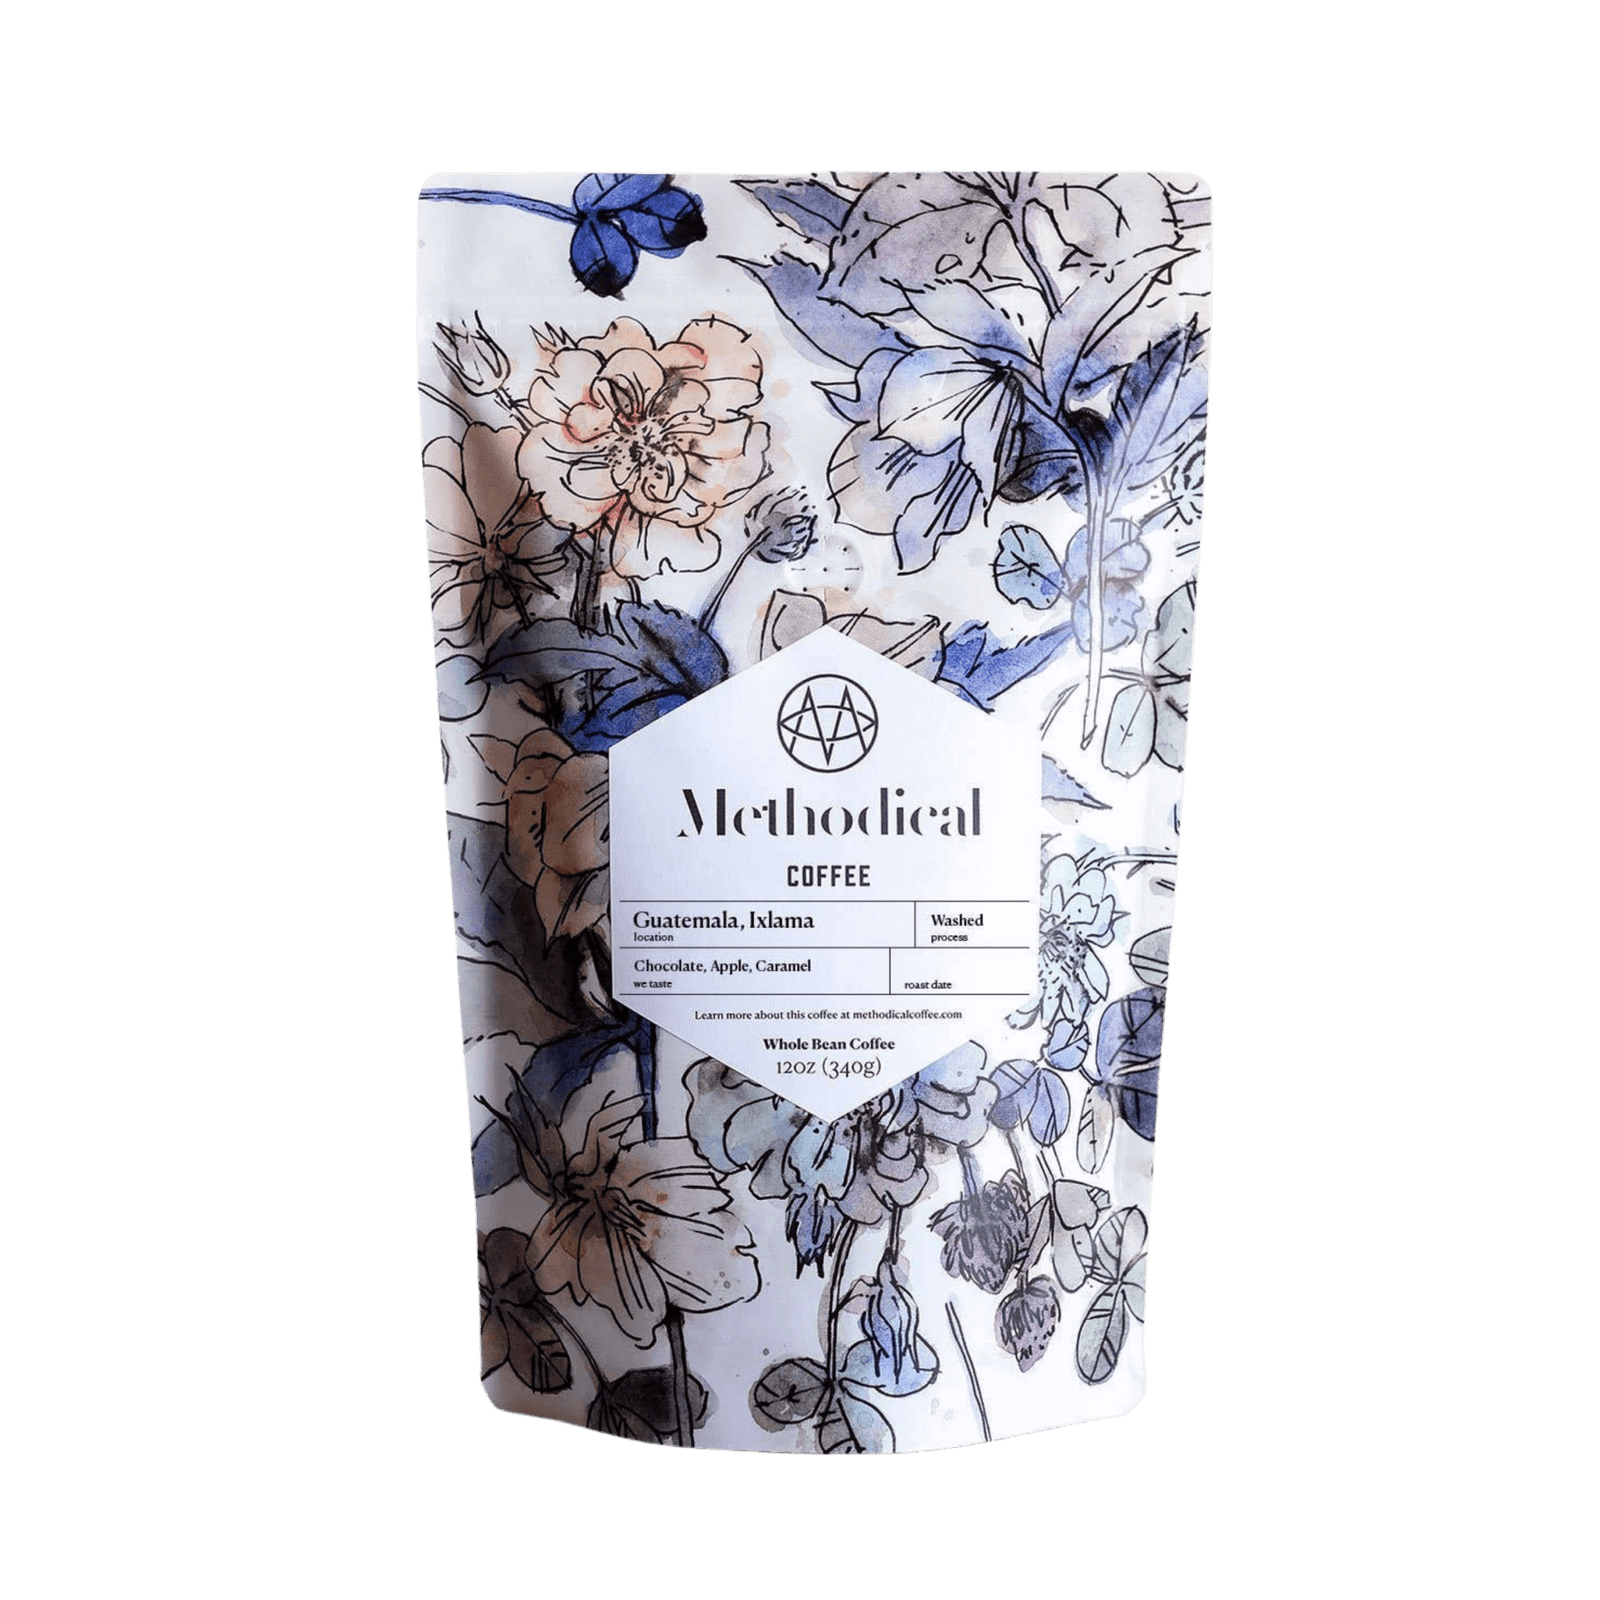 Whole Bean Guatemala Coffee By Methodical - Unboxme